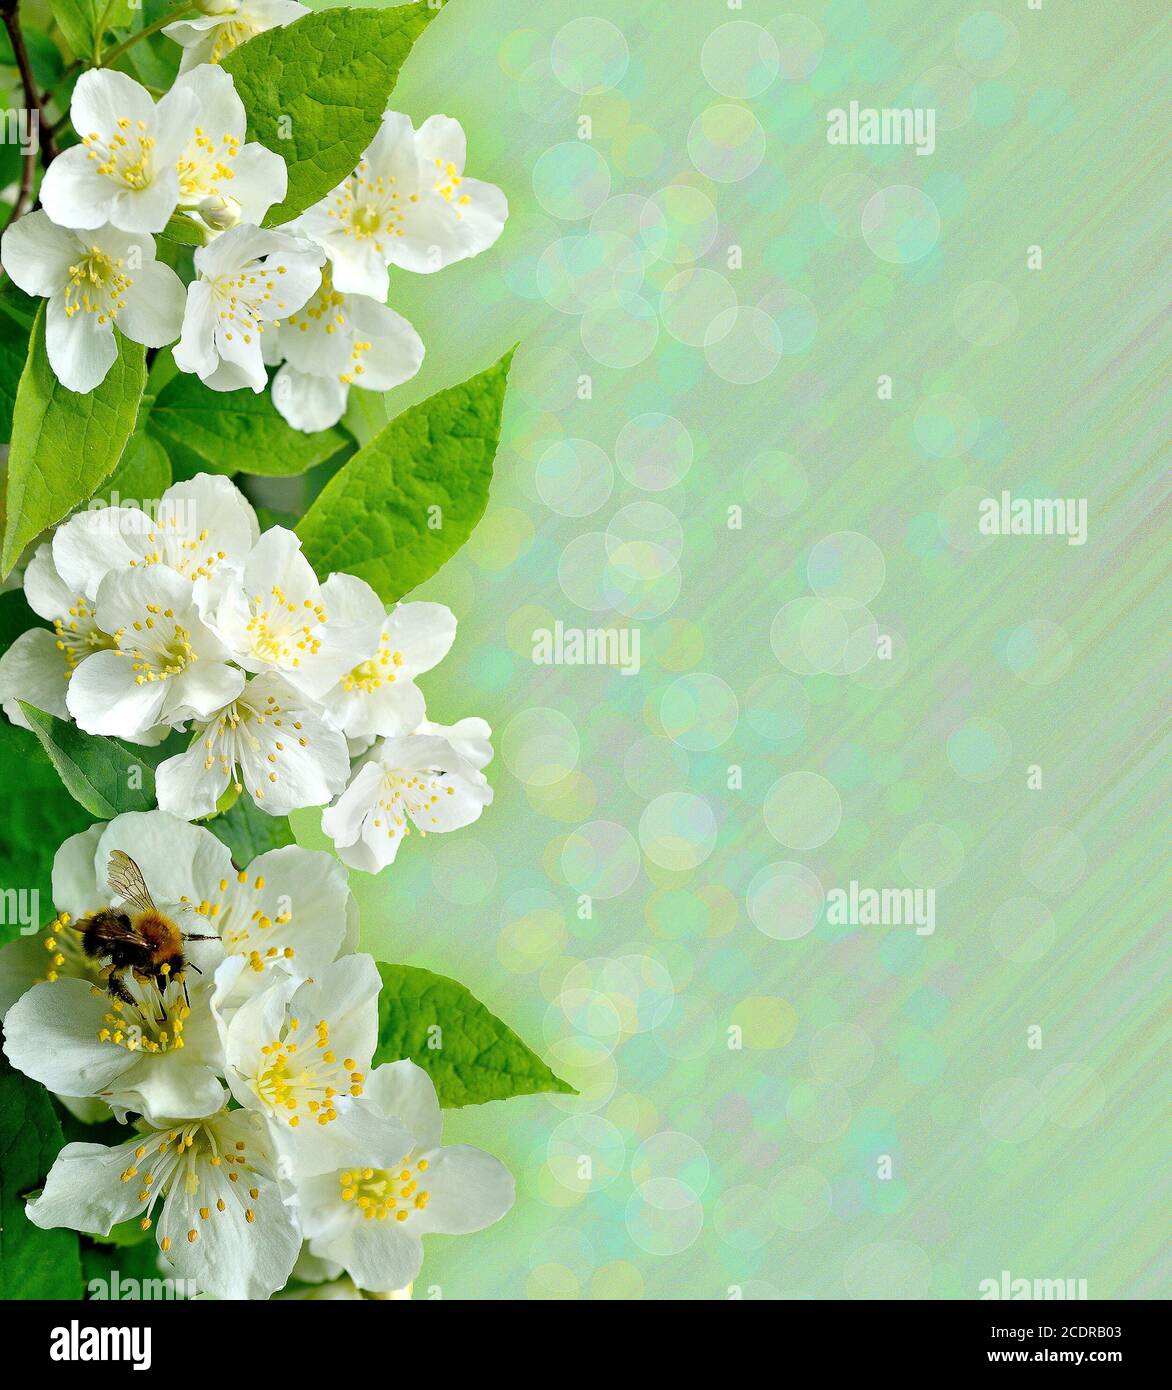 Jasmine flowers with bee on green background Stock Photo